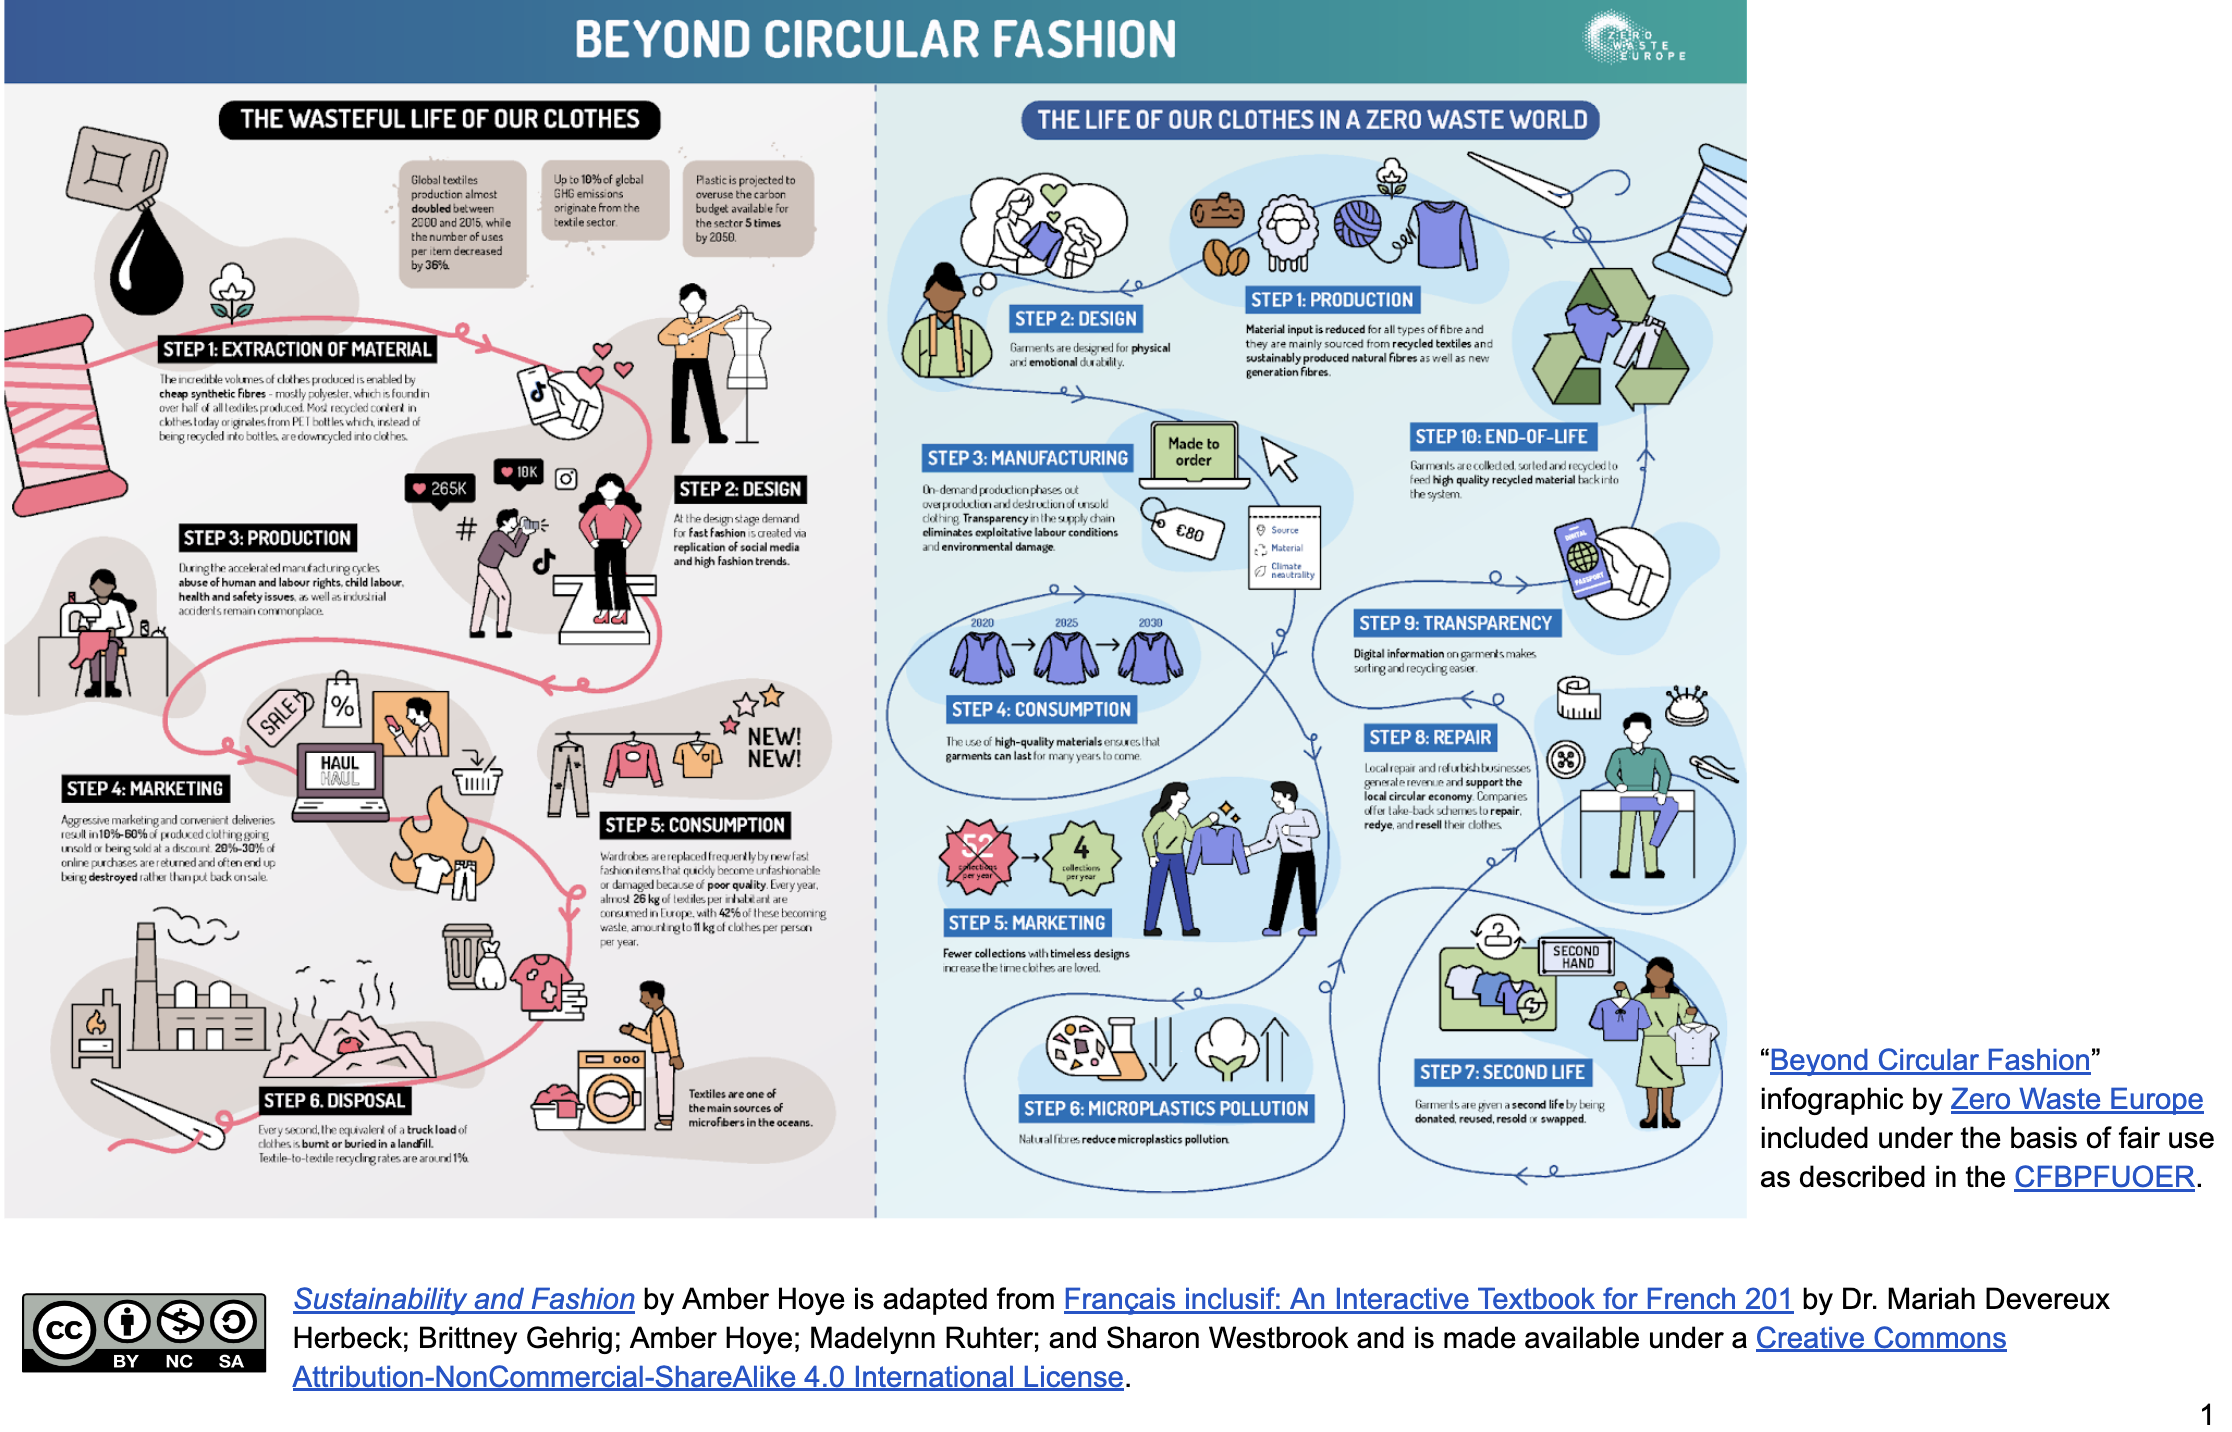 Fair use statement: “Beyond Circular Fashion” infographic by Zero Waste Europe included under the basis of fair use as described in the CFBPFUOER.